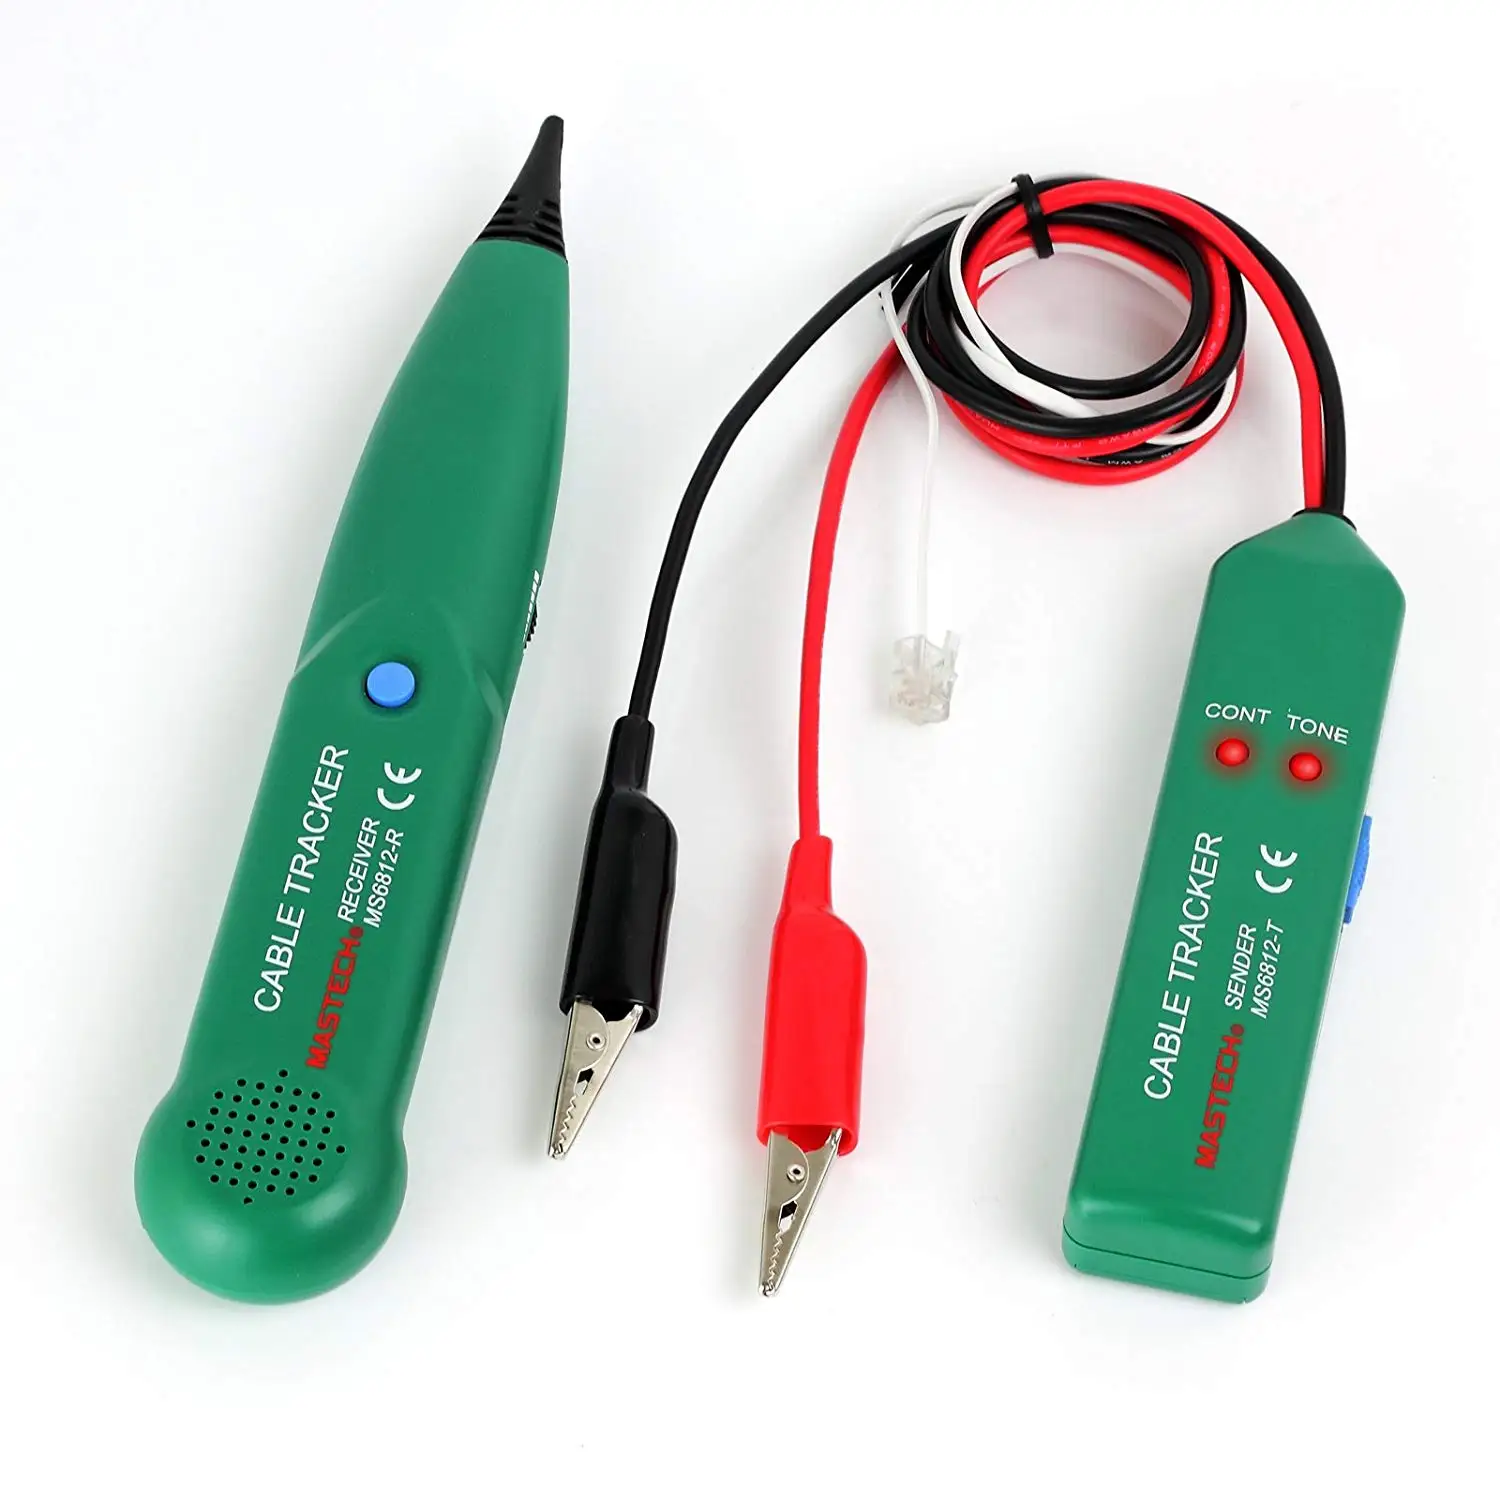 MS6812 Cable Finder Tone Generator Probe Tracker Wire Network Tester Tracer Kit 